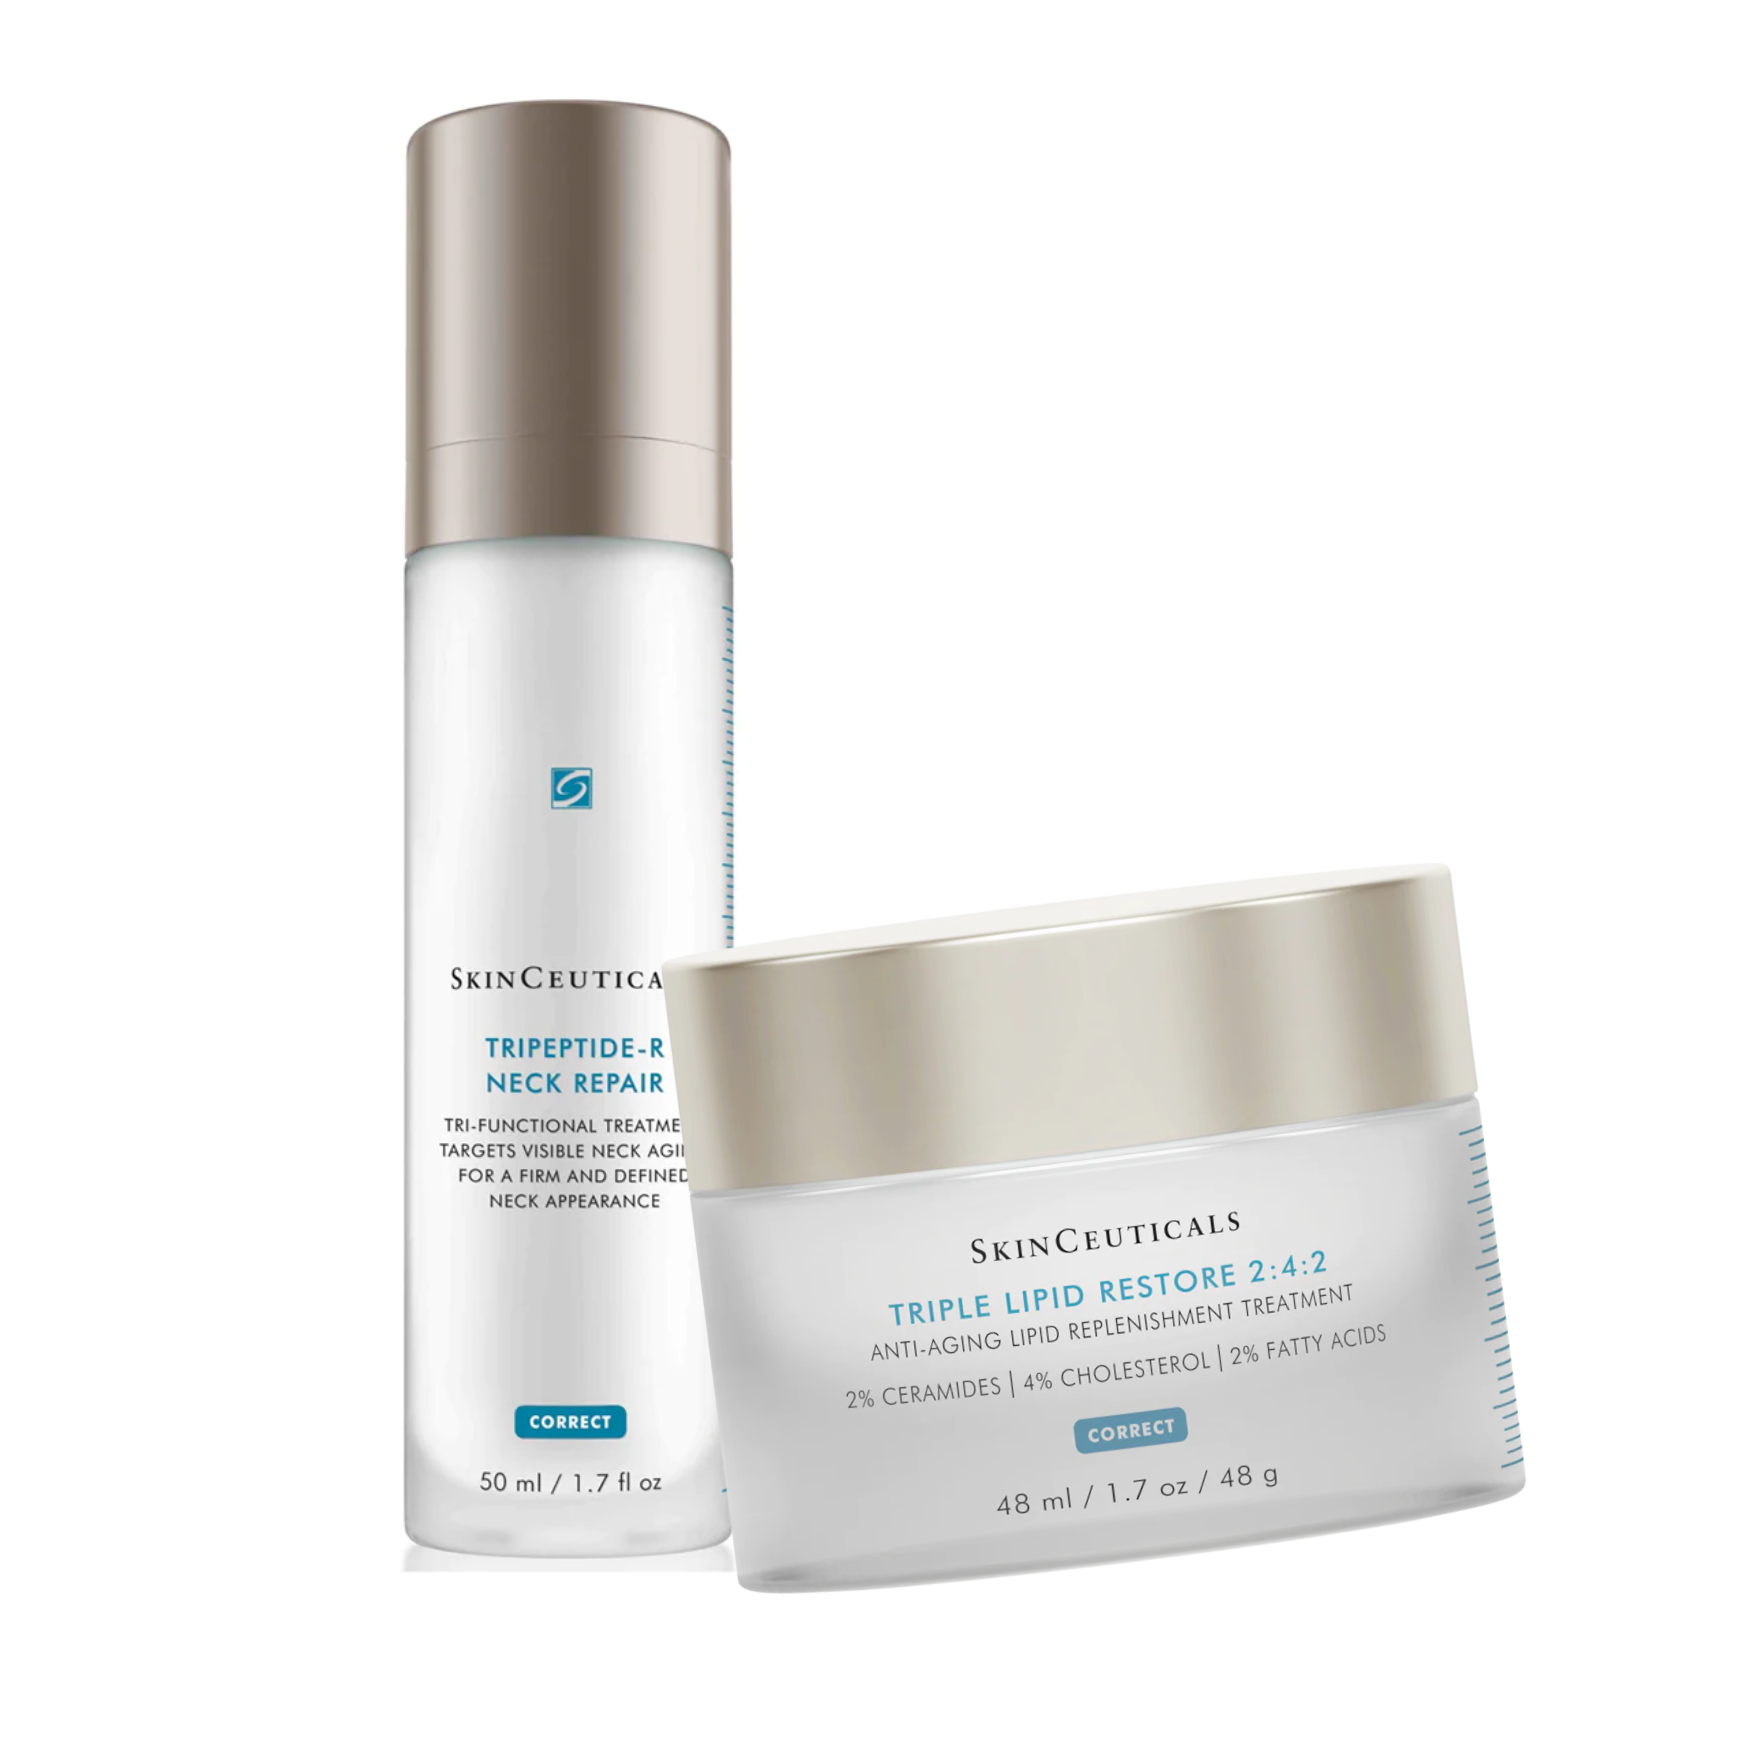 Village Wellness Spa - SkinCeuticals Anti-Aging for Face and Neck System - Tripeptide R Neck Repair Full Size 50ml - Triple Lipid Restore 2:4:2 Full Size 48ml